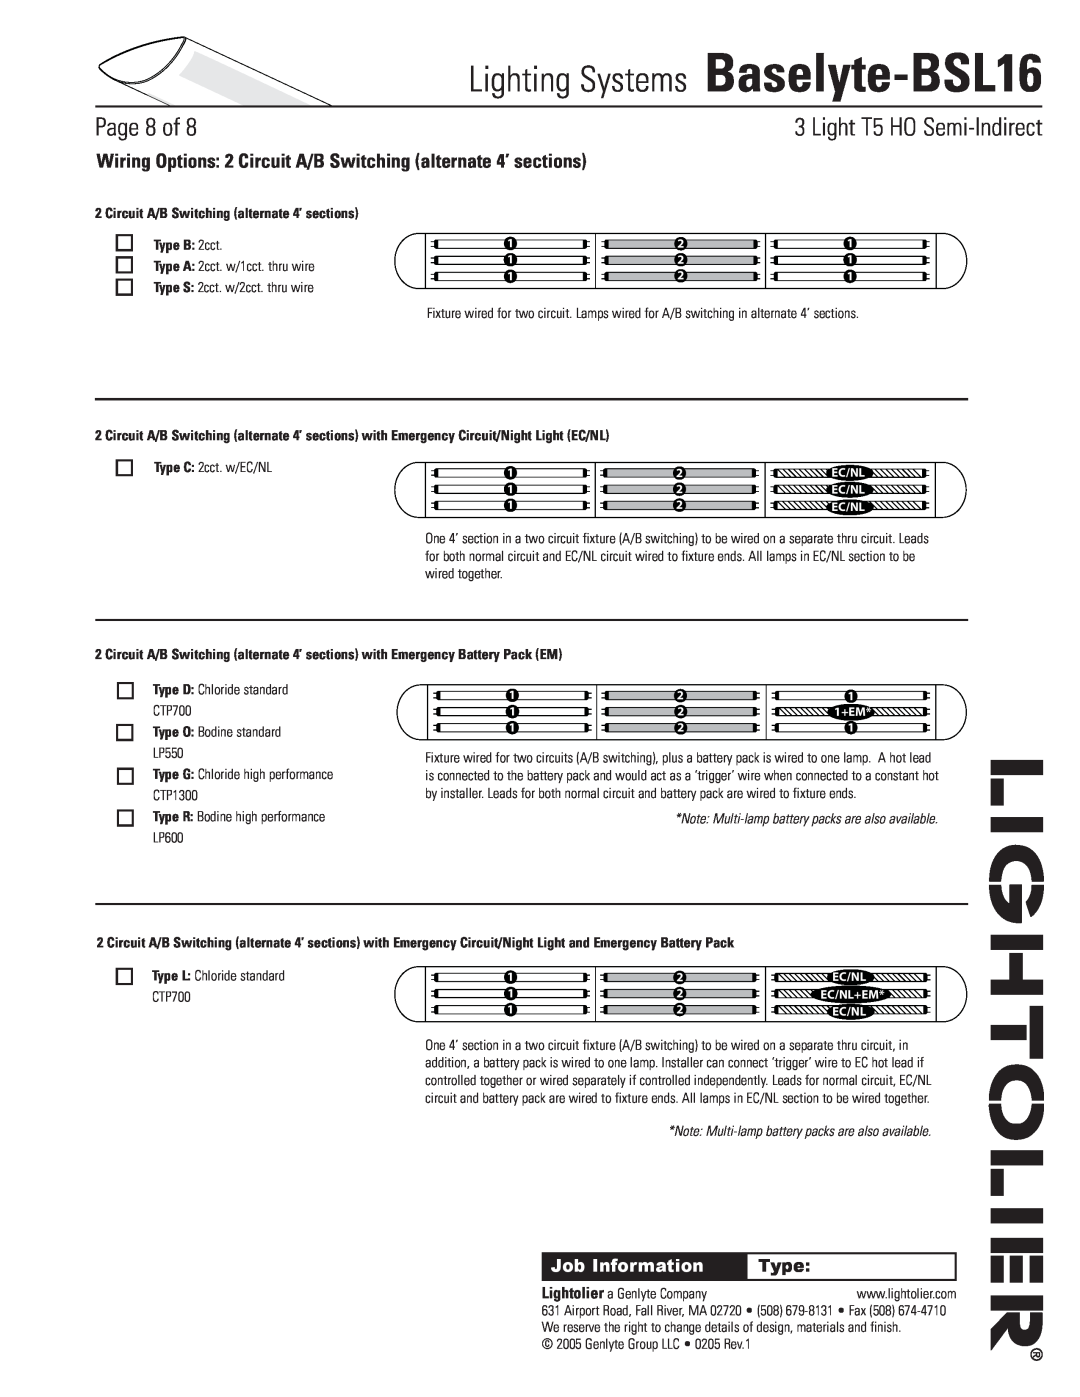 Lightolier Baselyte-BSL16 Circuit A/B Switching alternate 4’ sections, Type B 2cct, Type O Bodine standard LP550, Page of 